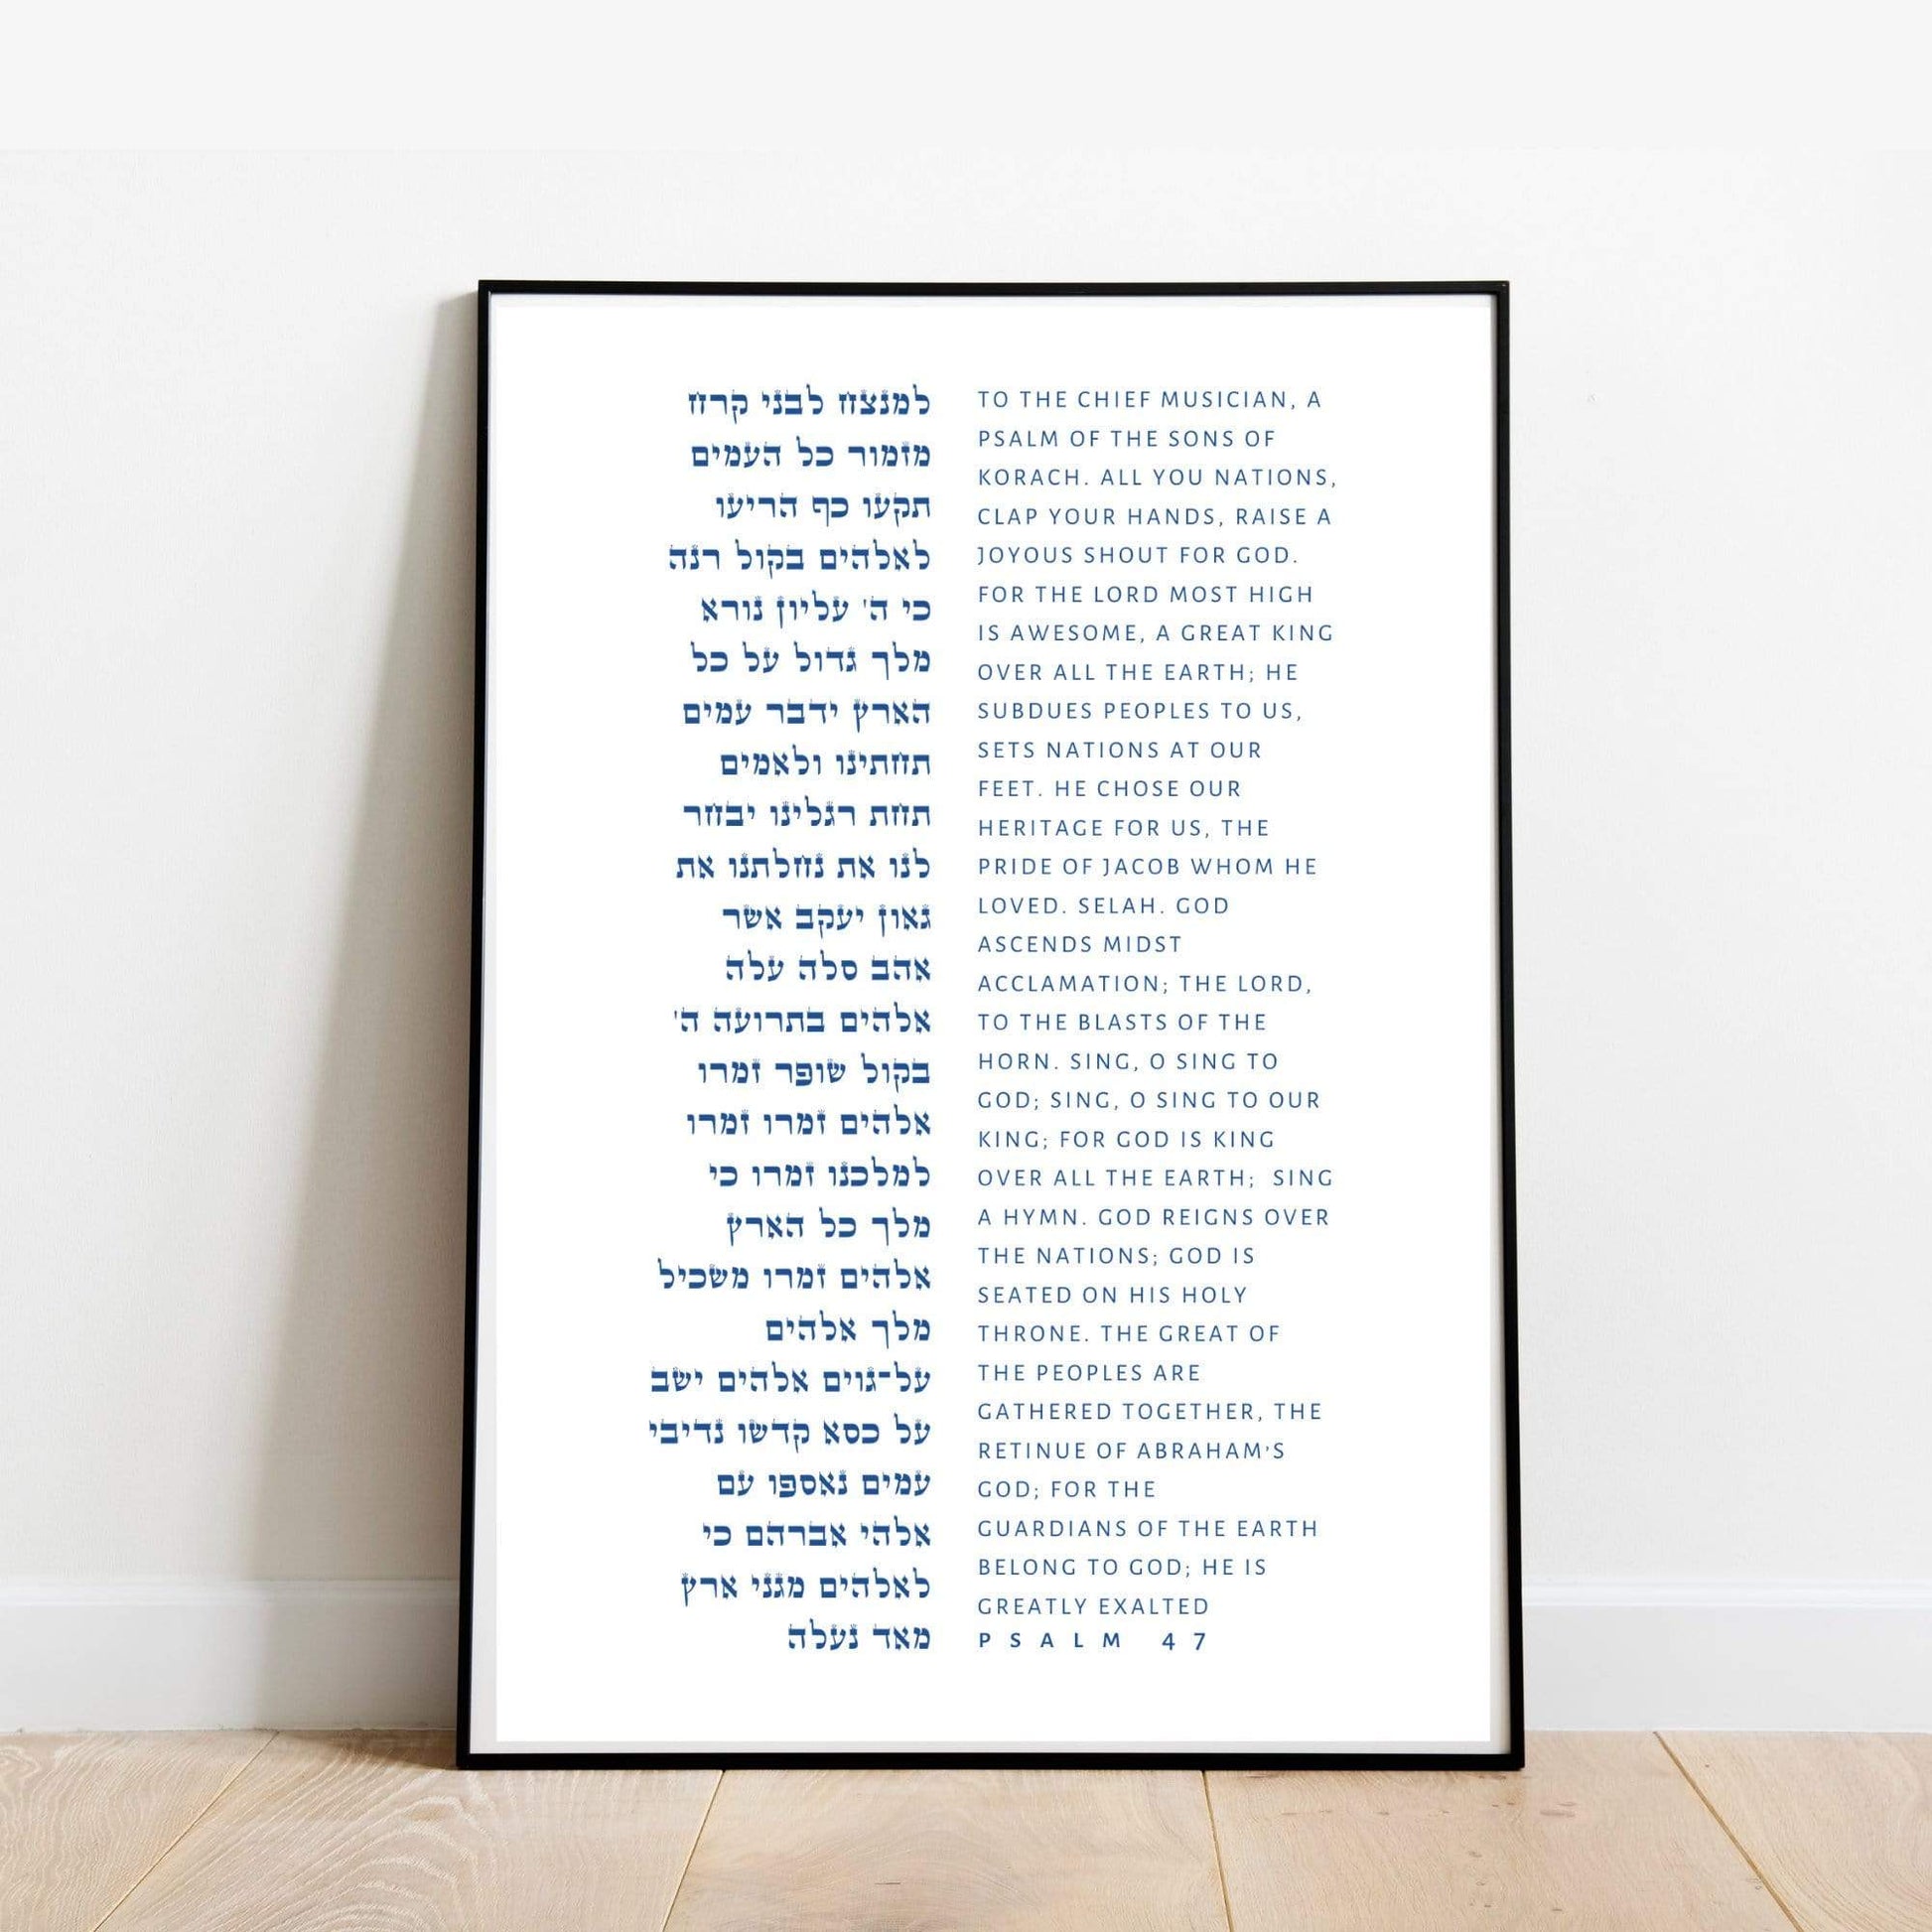 The Verse Psalm 47- Large 11x17